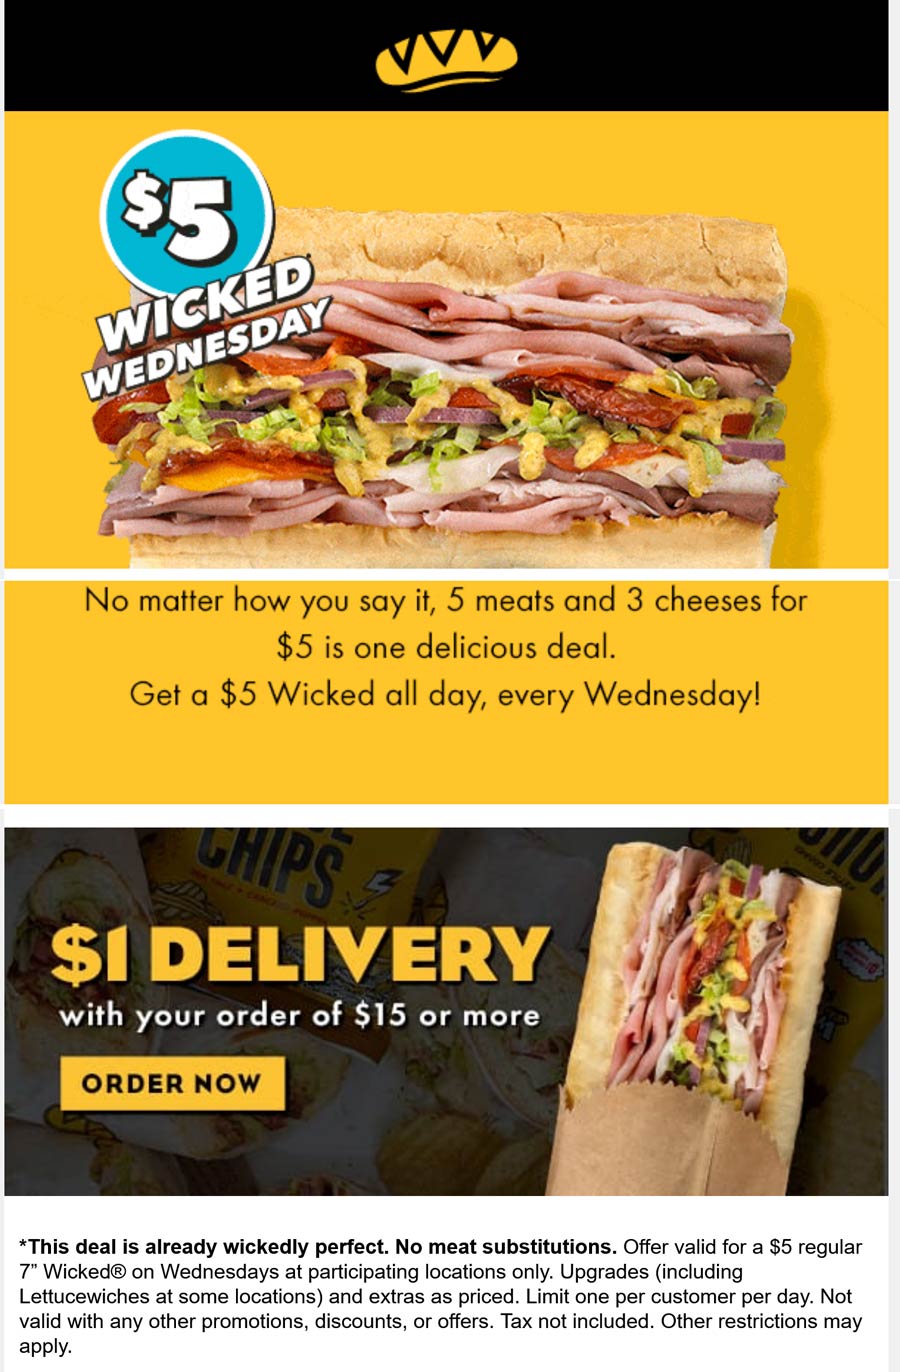 Which Wich restaurants Coupon  $5 wicked 5 meat 3 cheese sandwich today at Which Wich #whichwich 